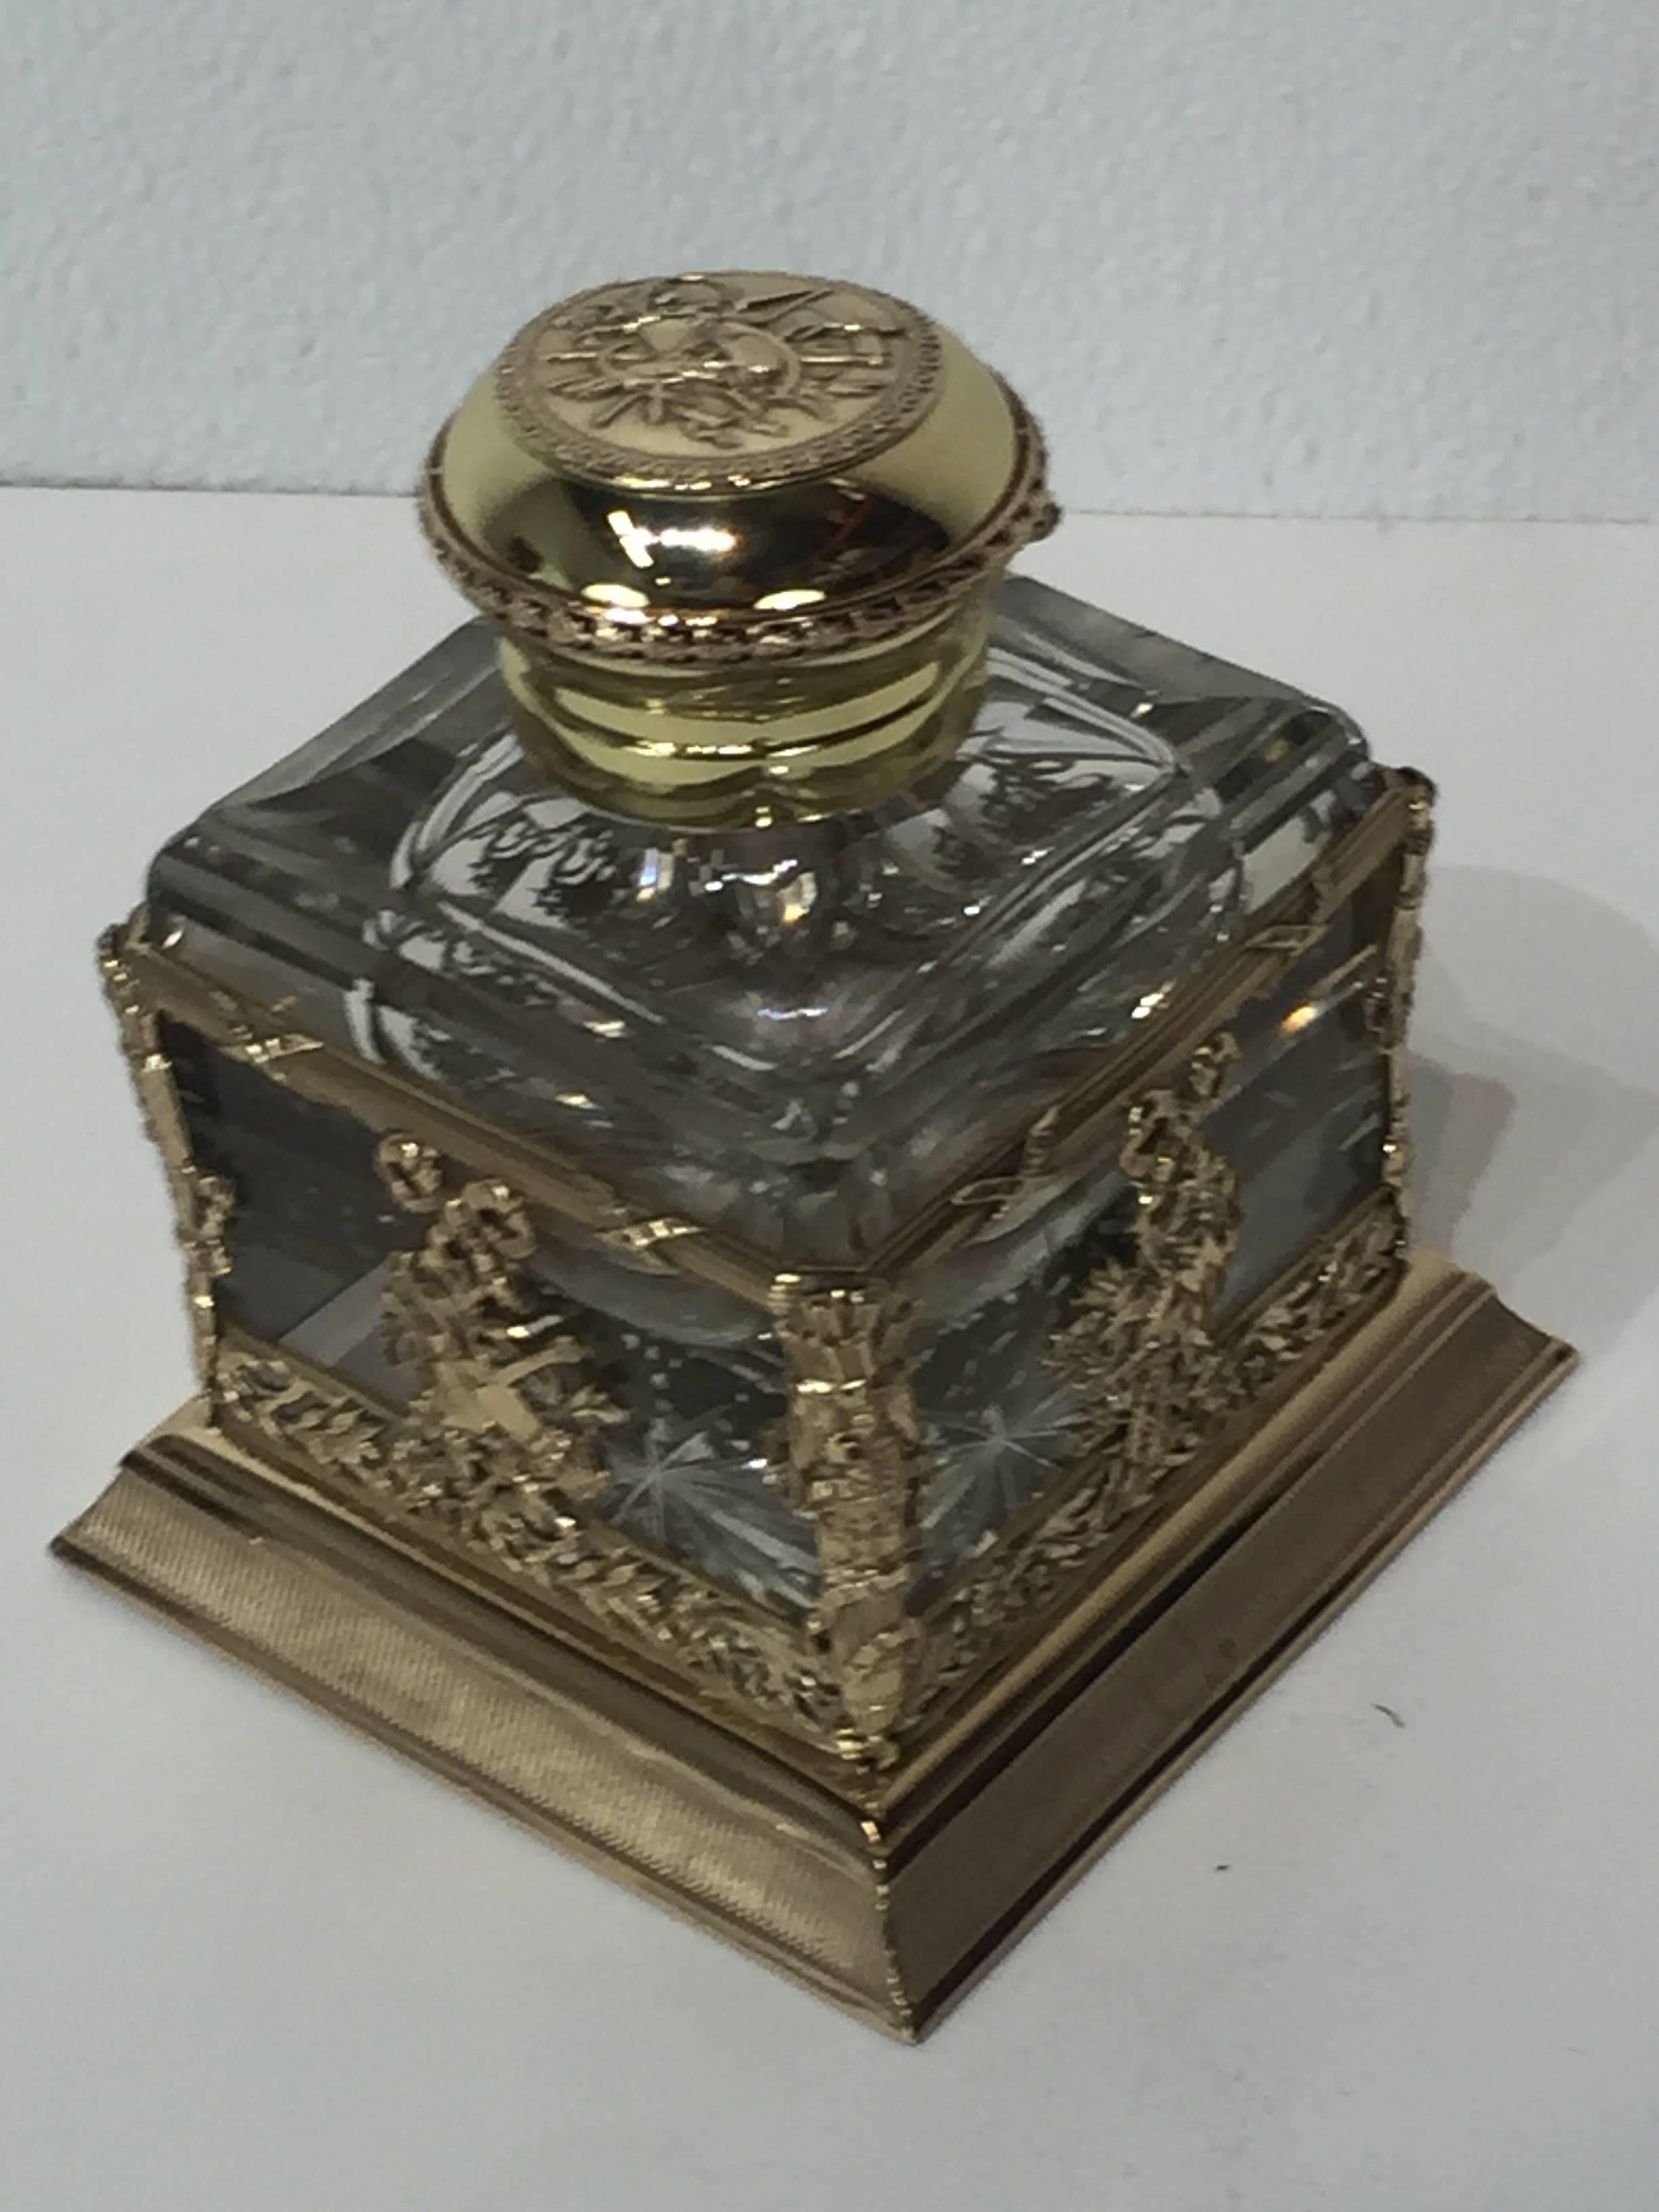 Empire bronze-mounted Baccarat inkwell, beautiful crisp bronze casting, on faceted Baccarat crystal cube inkwell, unsigned.